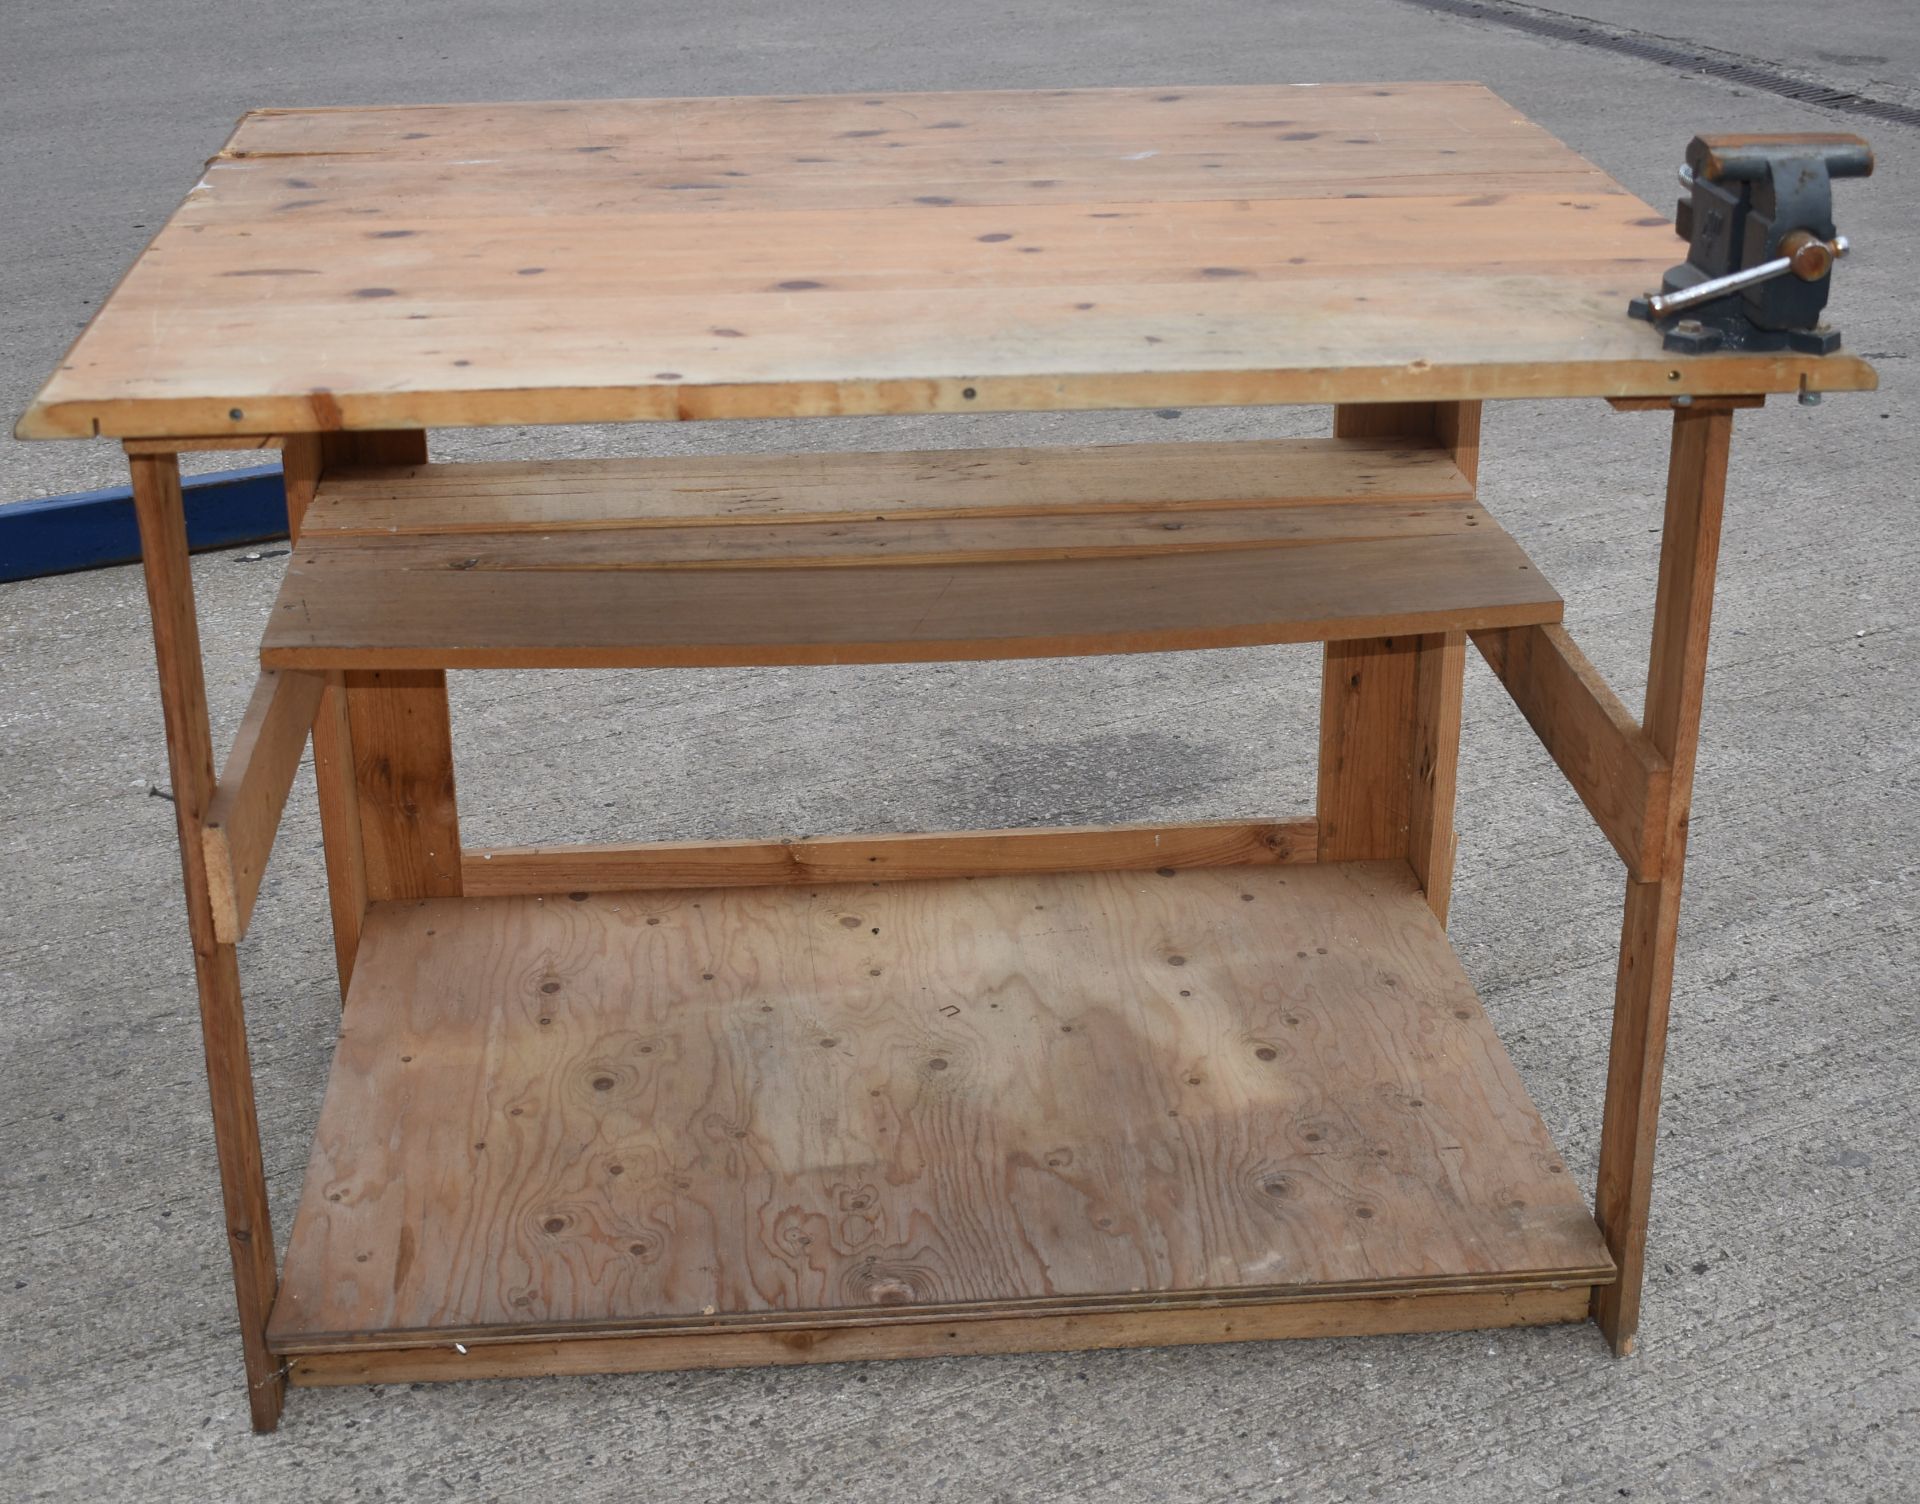 1 x Wooden Workbench With Stanley 4" Vice - 118 (L) x 94.5(D) x 88(H) cms - Ref: K234 - CL905 - Loca - Image 10 of 10